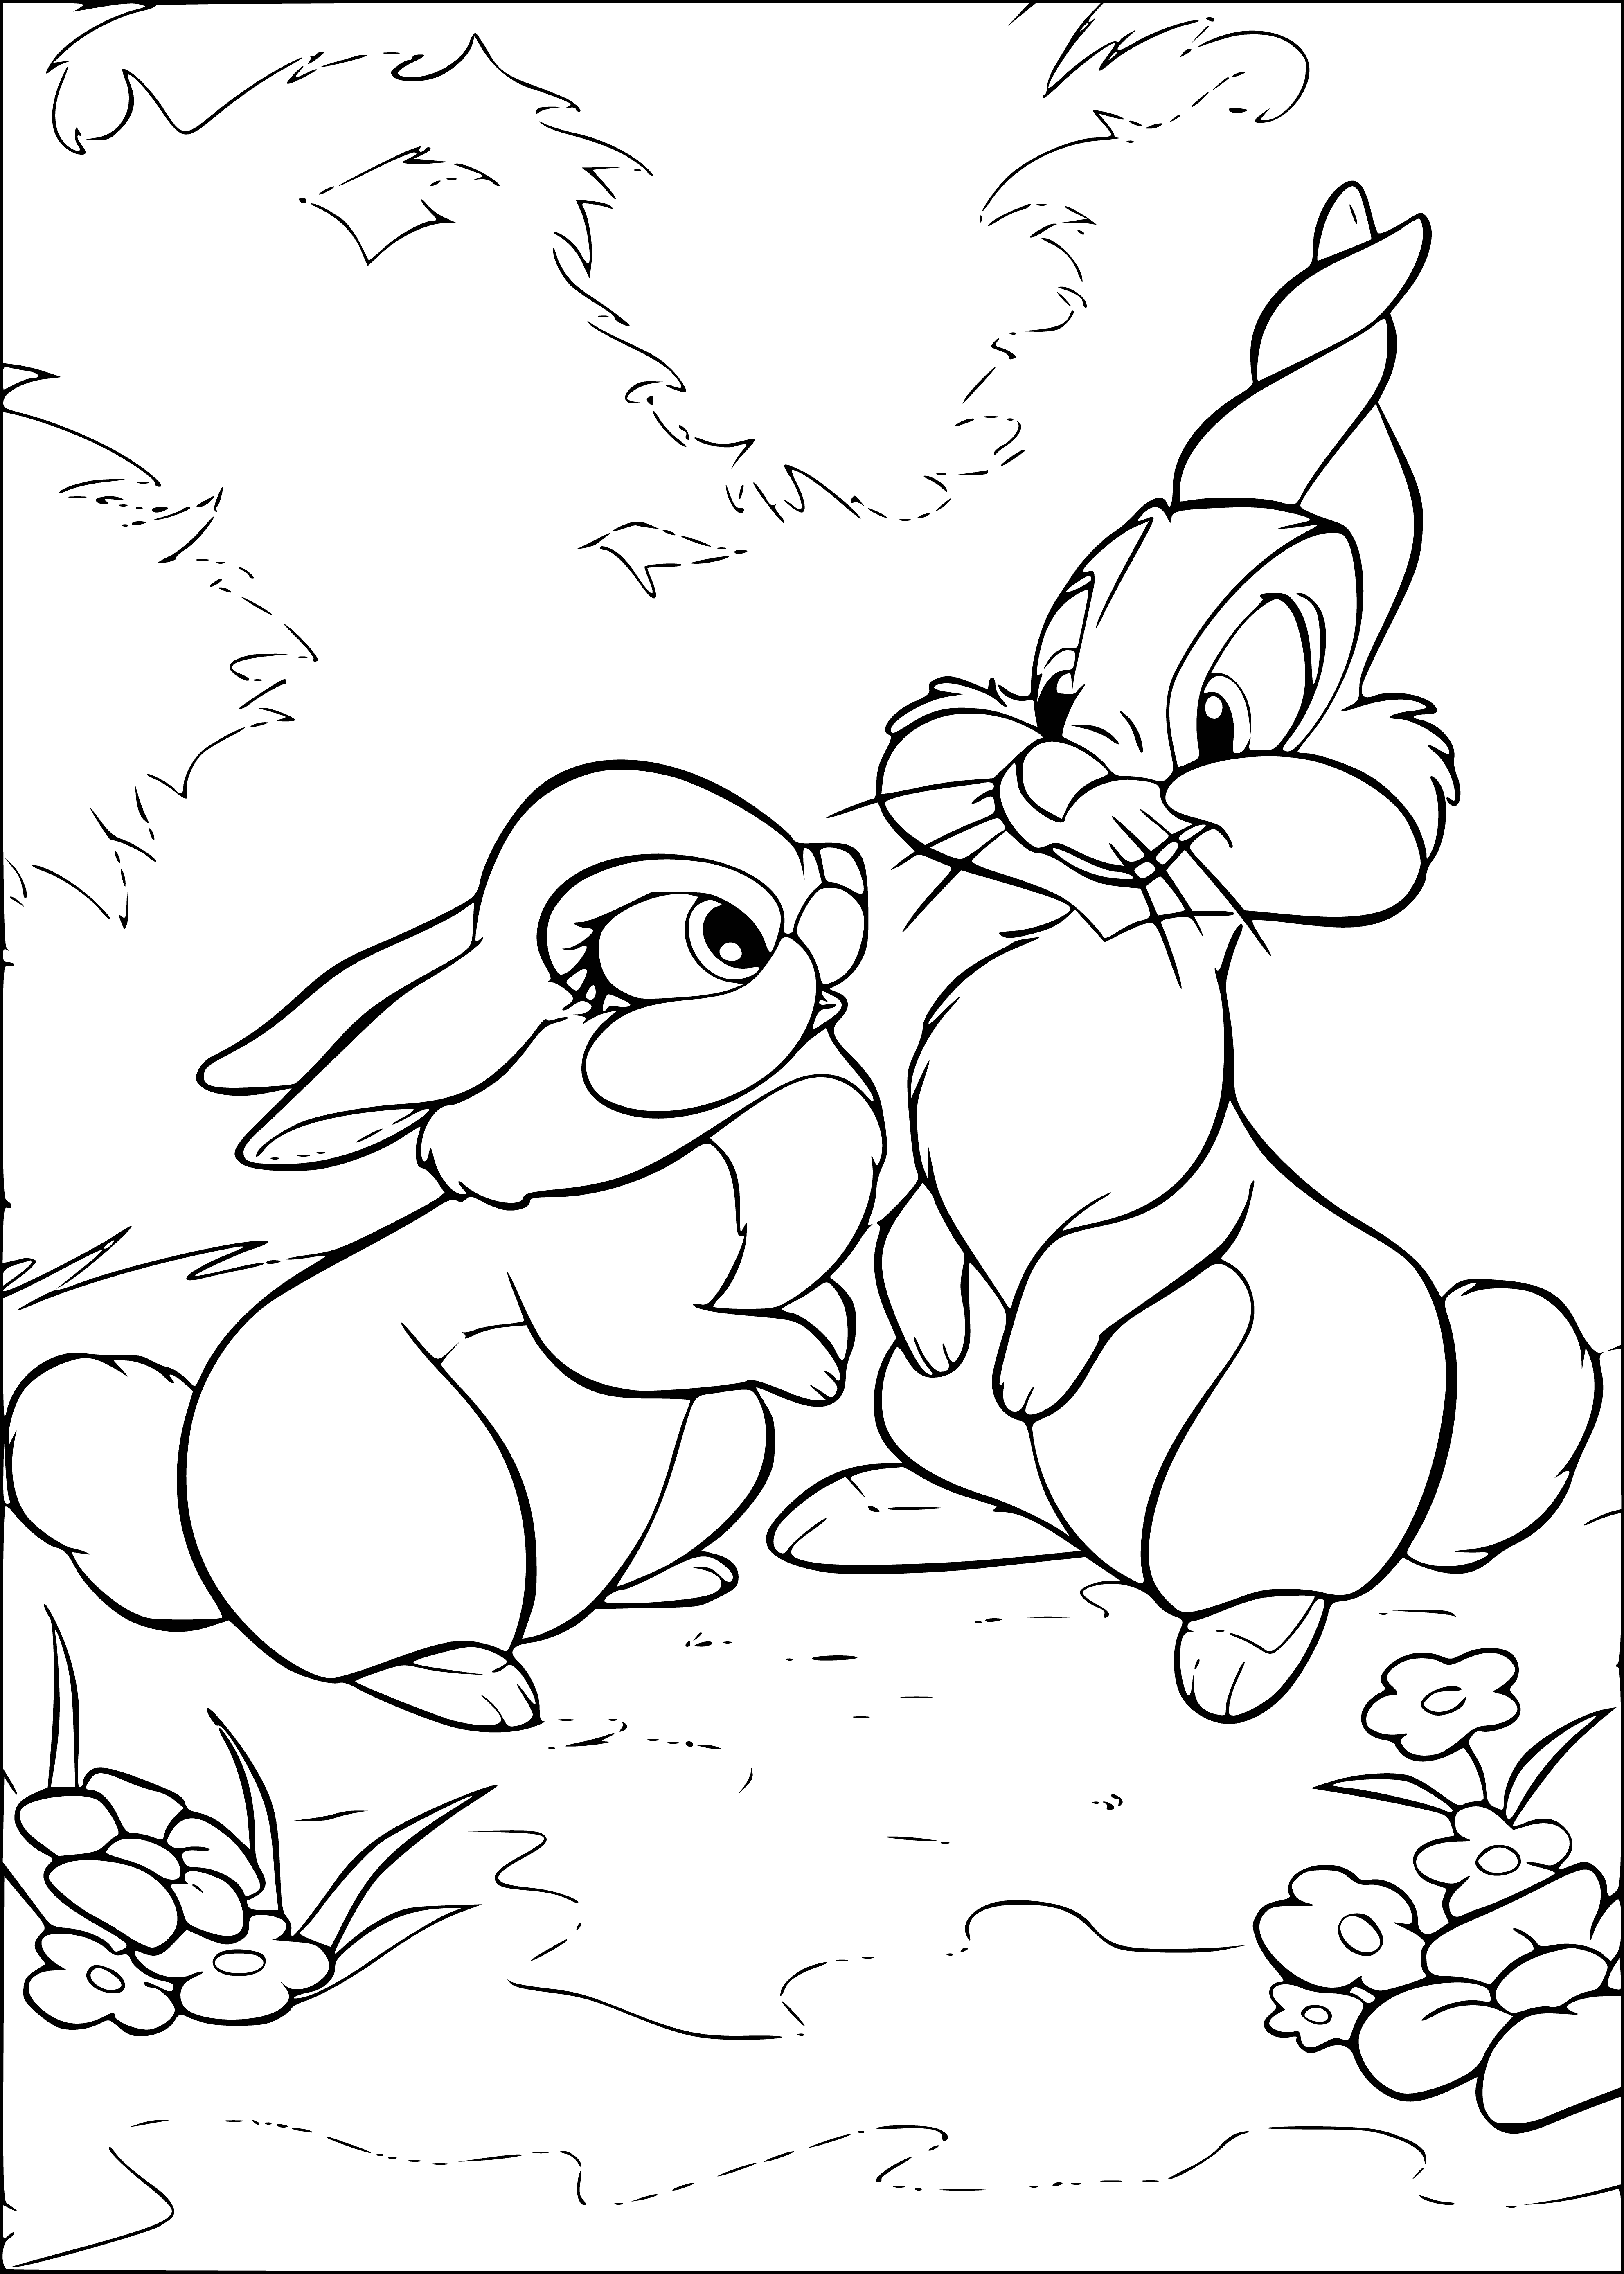 coloring page: Two hares crouching and standing, each with unique characteristics, one light-colored and one dark-colored. Whiskers and ears differ, eyes closed on light-colored hare. #color #hare